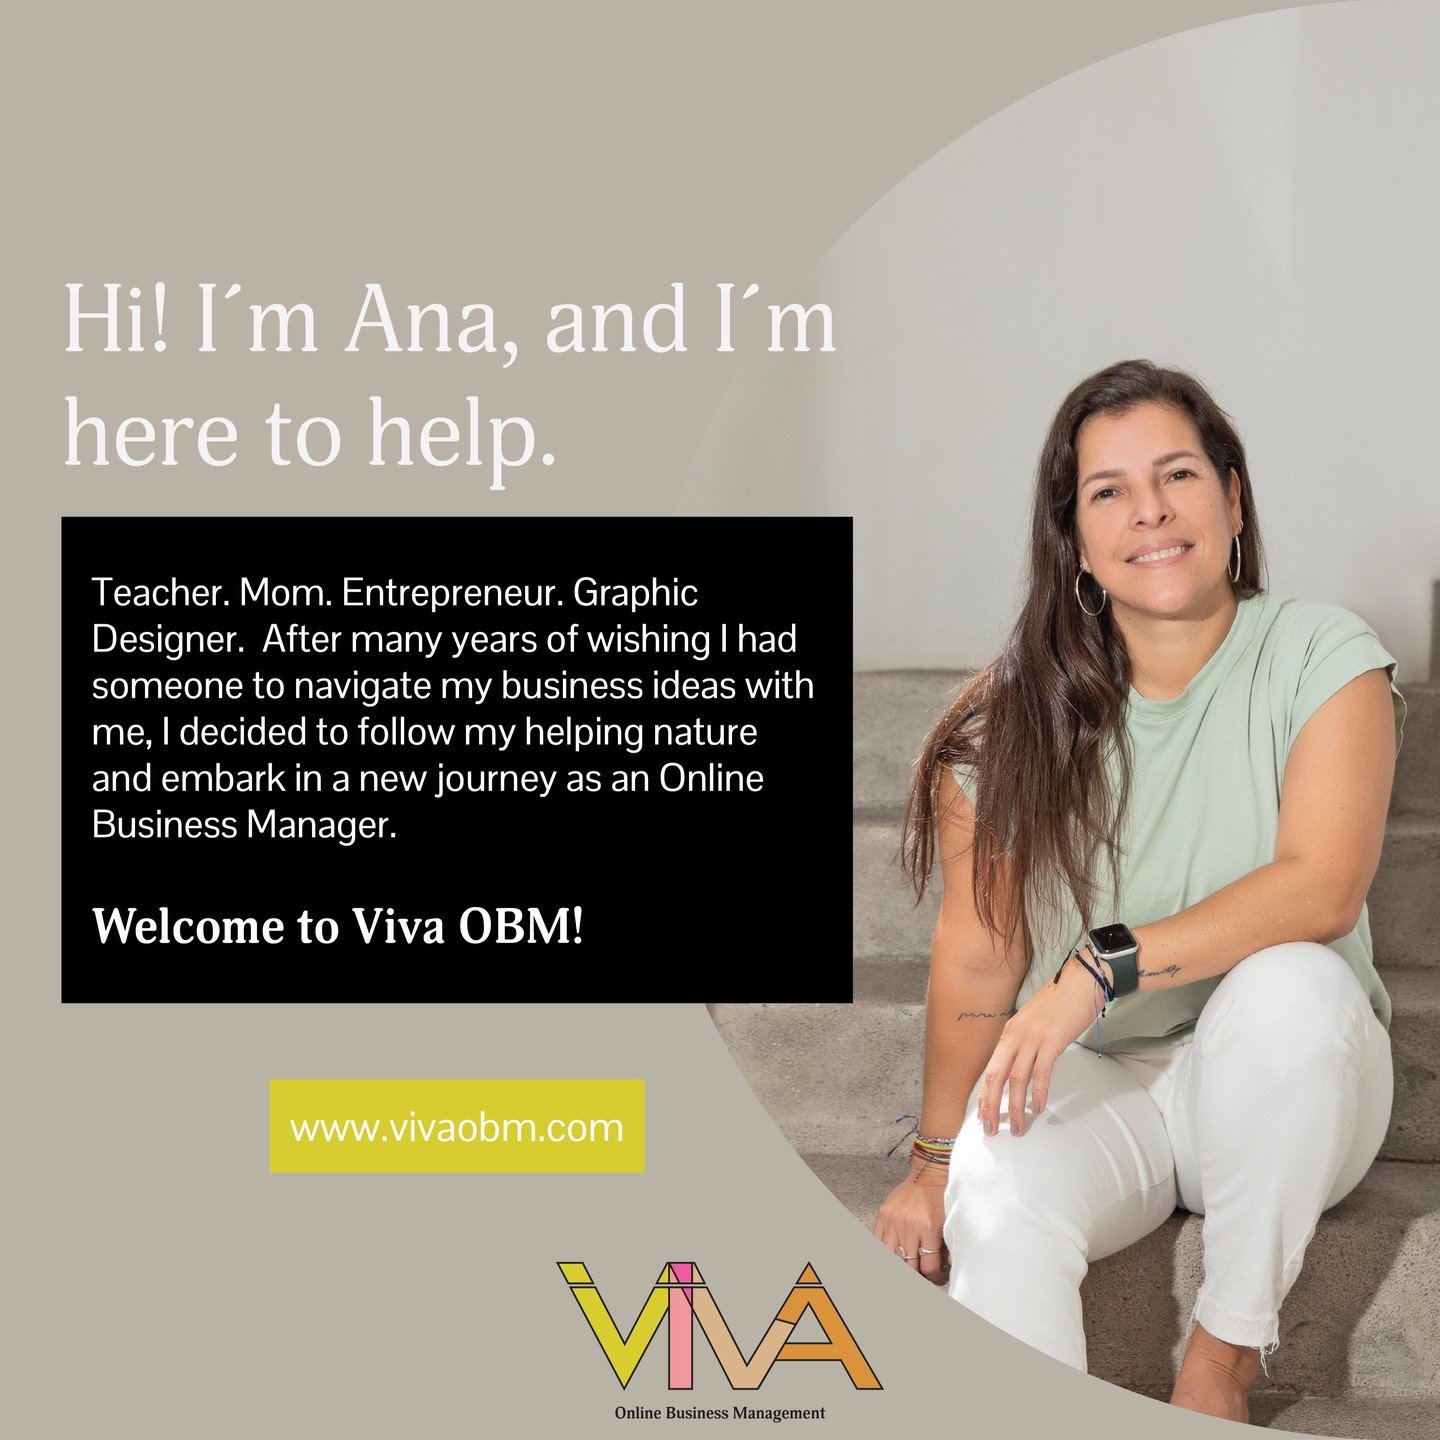 Hi and welcome!
My journey: From wearing multiple hats to helping others do the same! I've spent years honing my skills as an entrepreneur, teacher, and graphic designer, and now I'm thrilled to bring that expertise to my newest venture: Viva OBM, yo